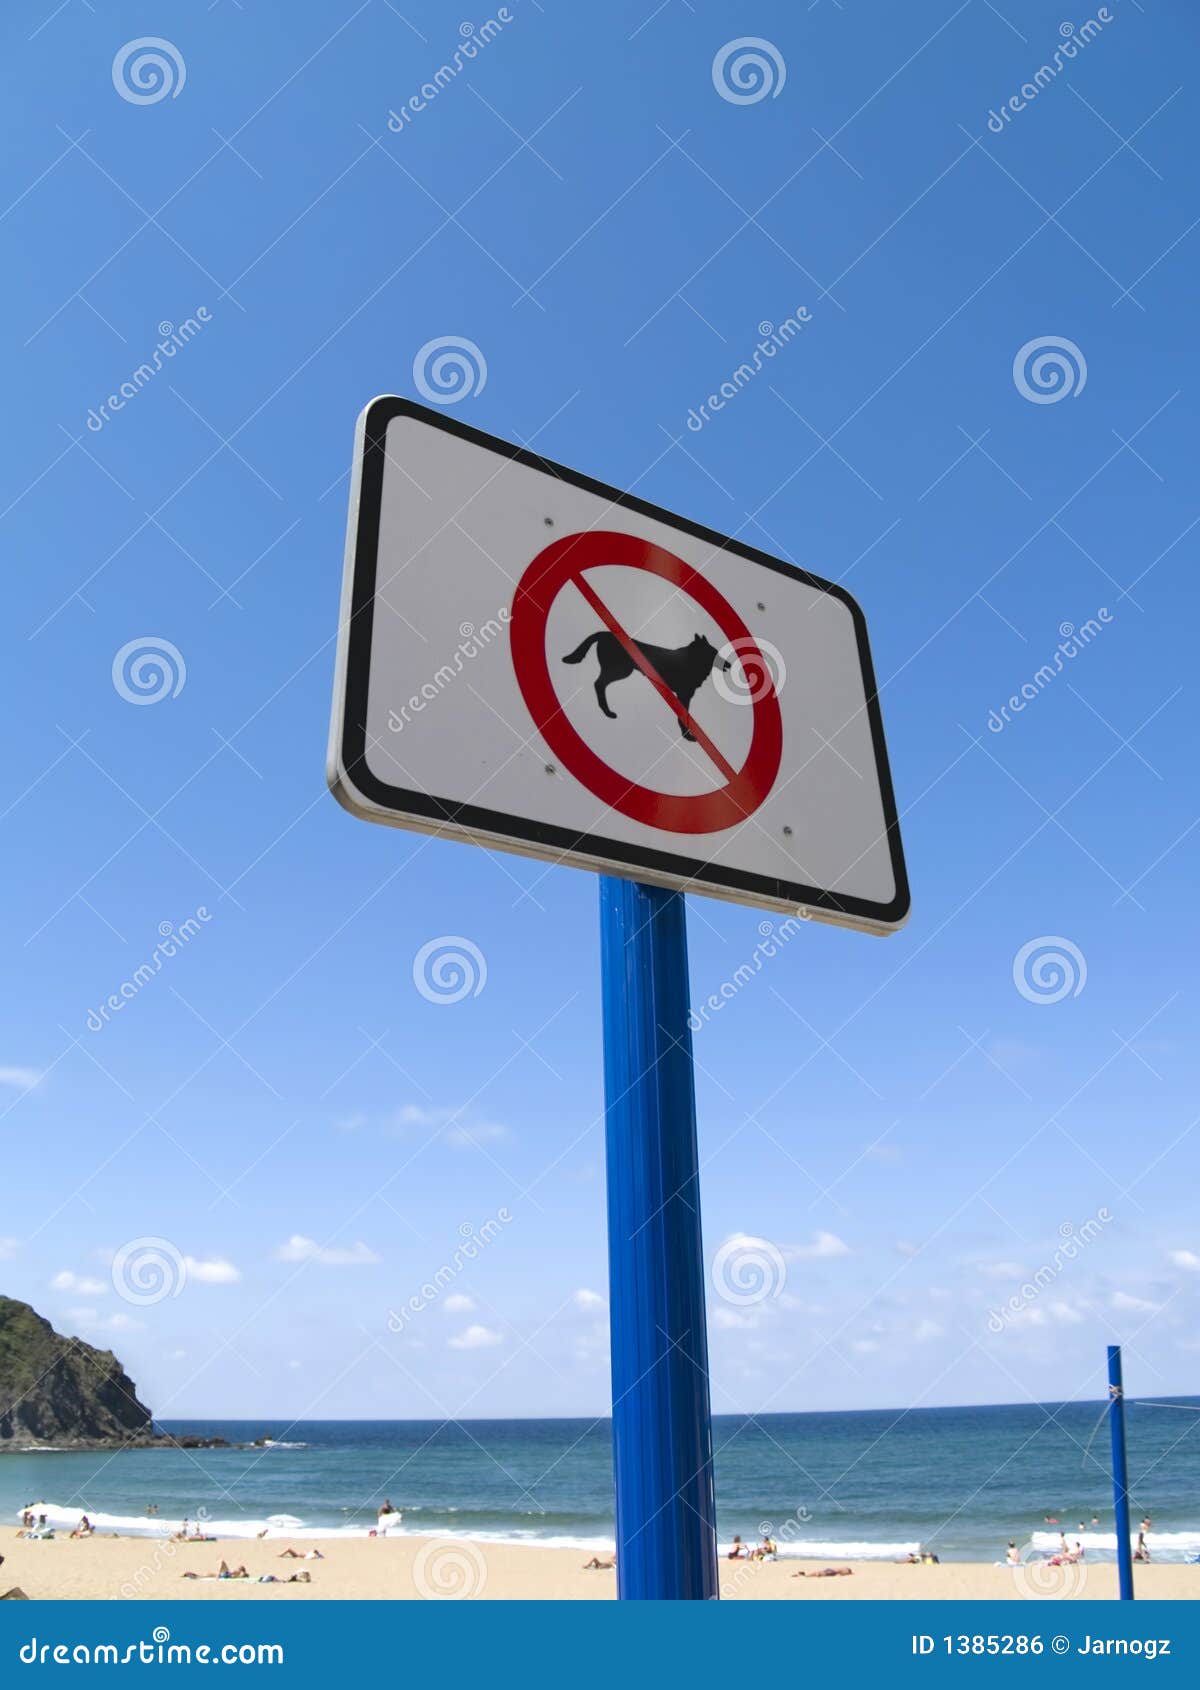 sign for no dogs beyond this mark.